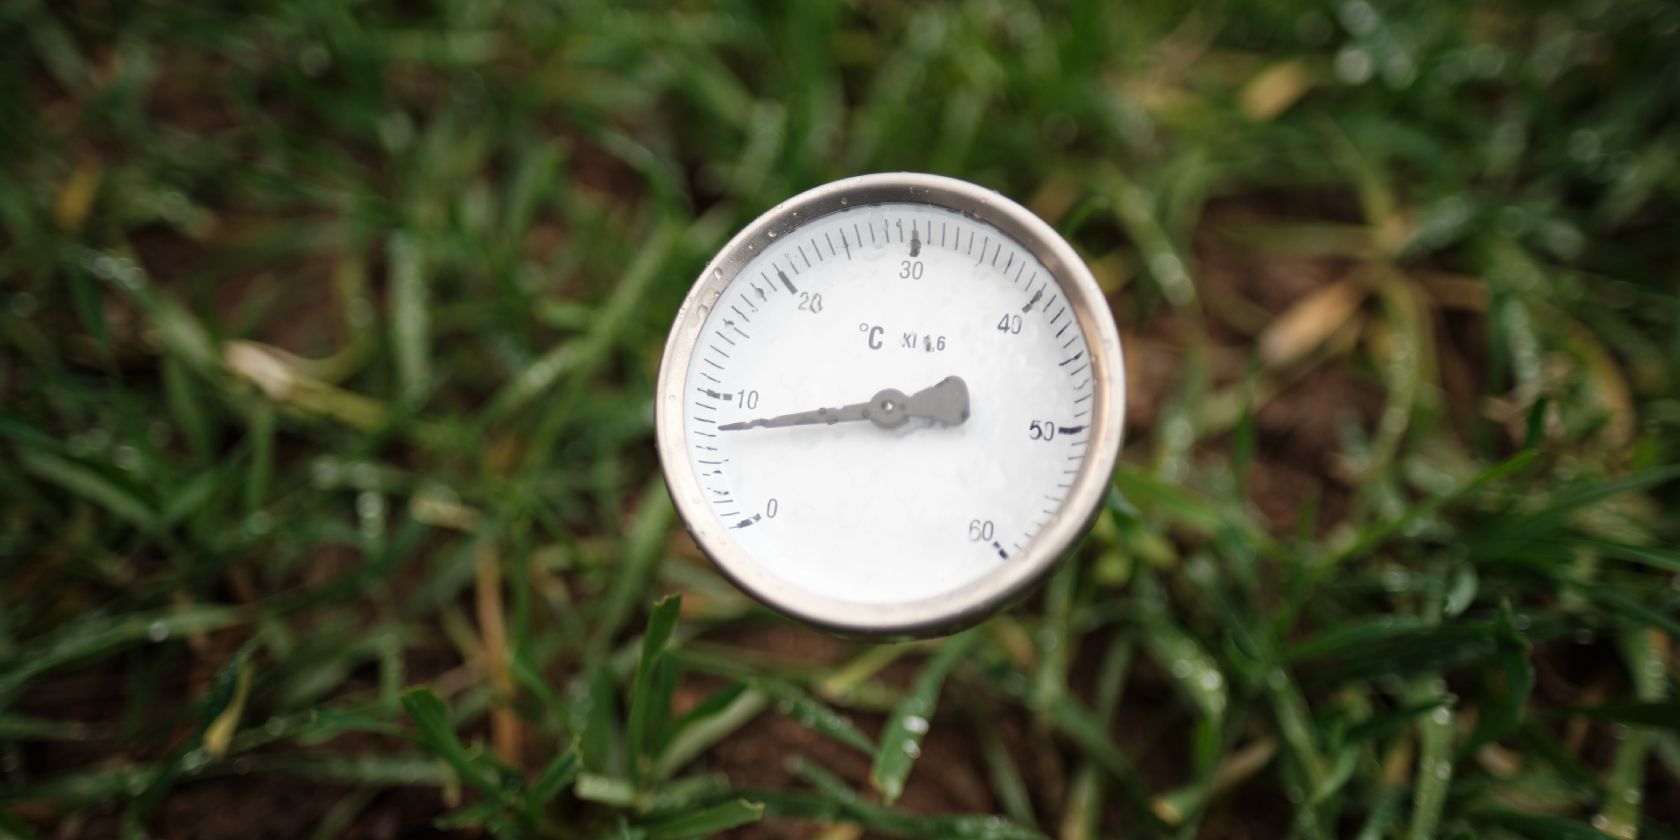 Acu-Rite Soil Thermometer